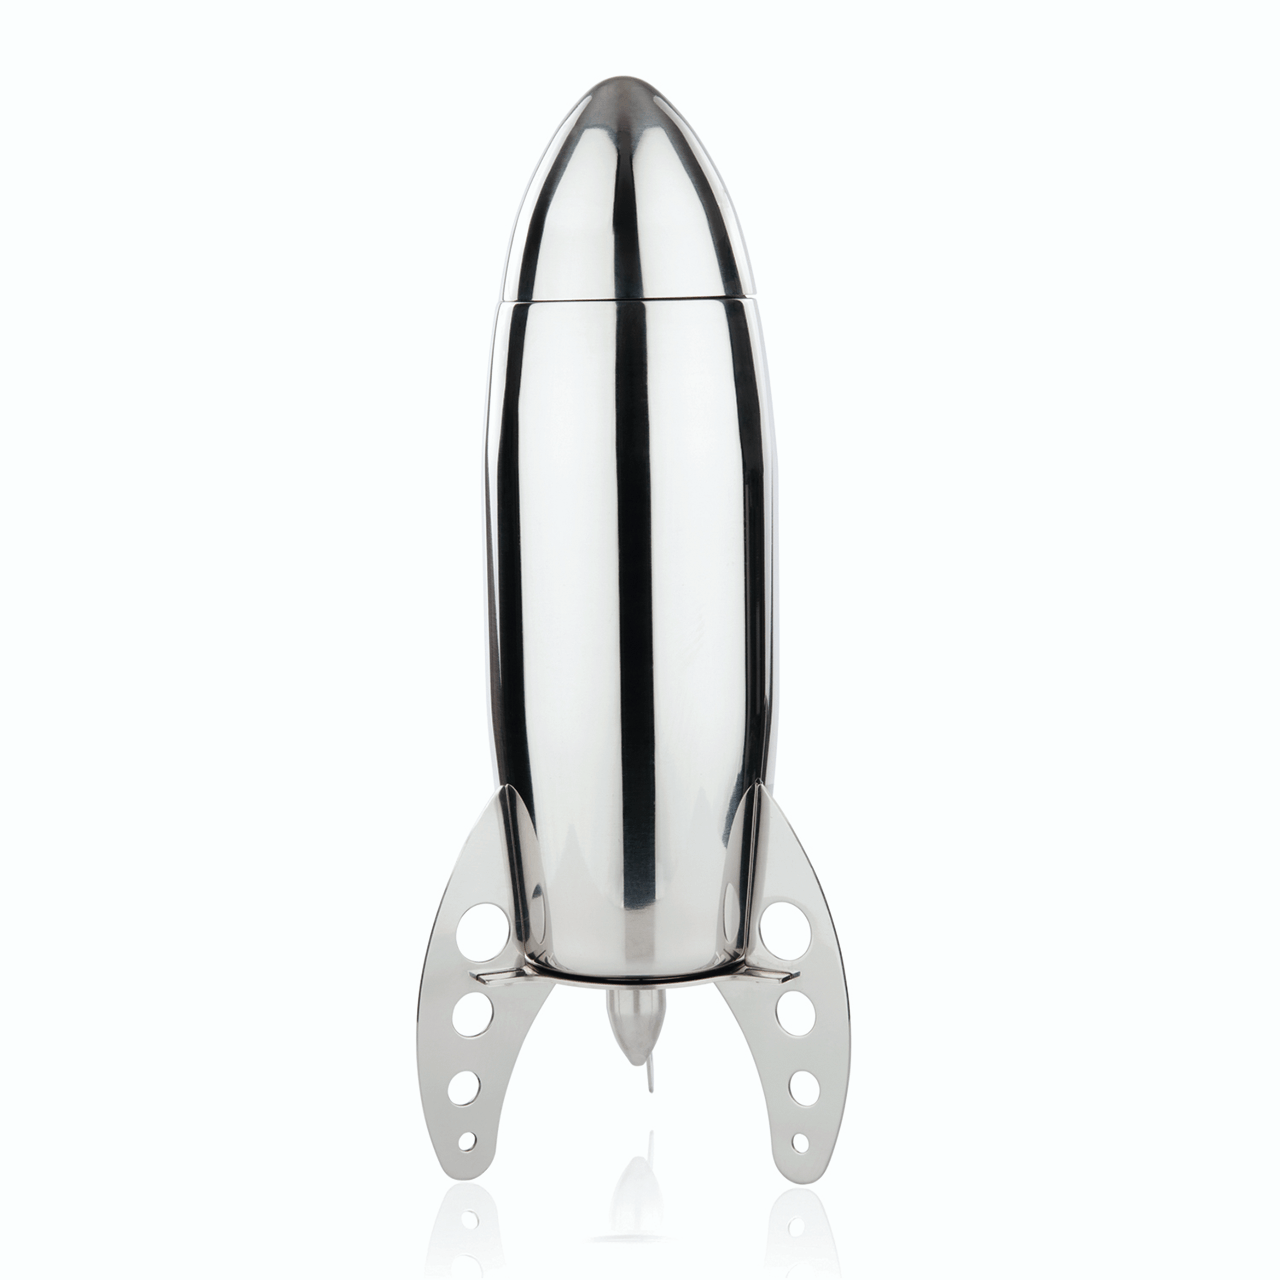 https://cdn10.bigcommerce.com/s-9dzfgkp0th/products/1660/images/2120/Viski-Admiral-Stainless-Steel-Rocket-Cocktail-James-Anthony-Collection__47578.1502807558.1280.1280.png?c=2